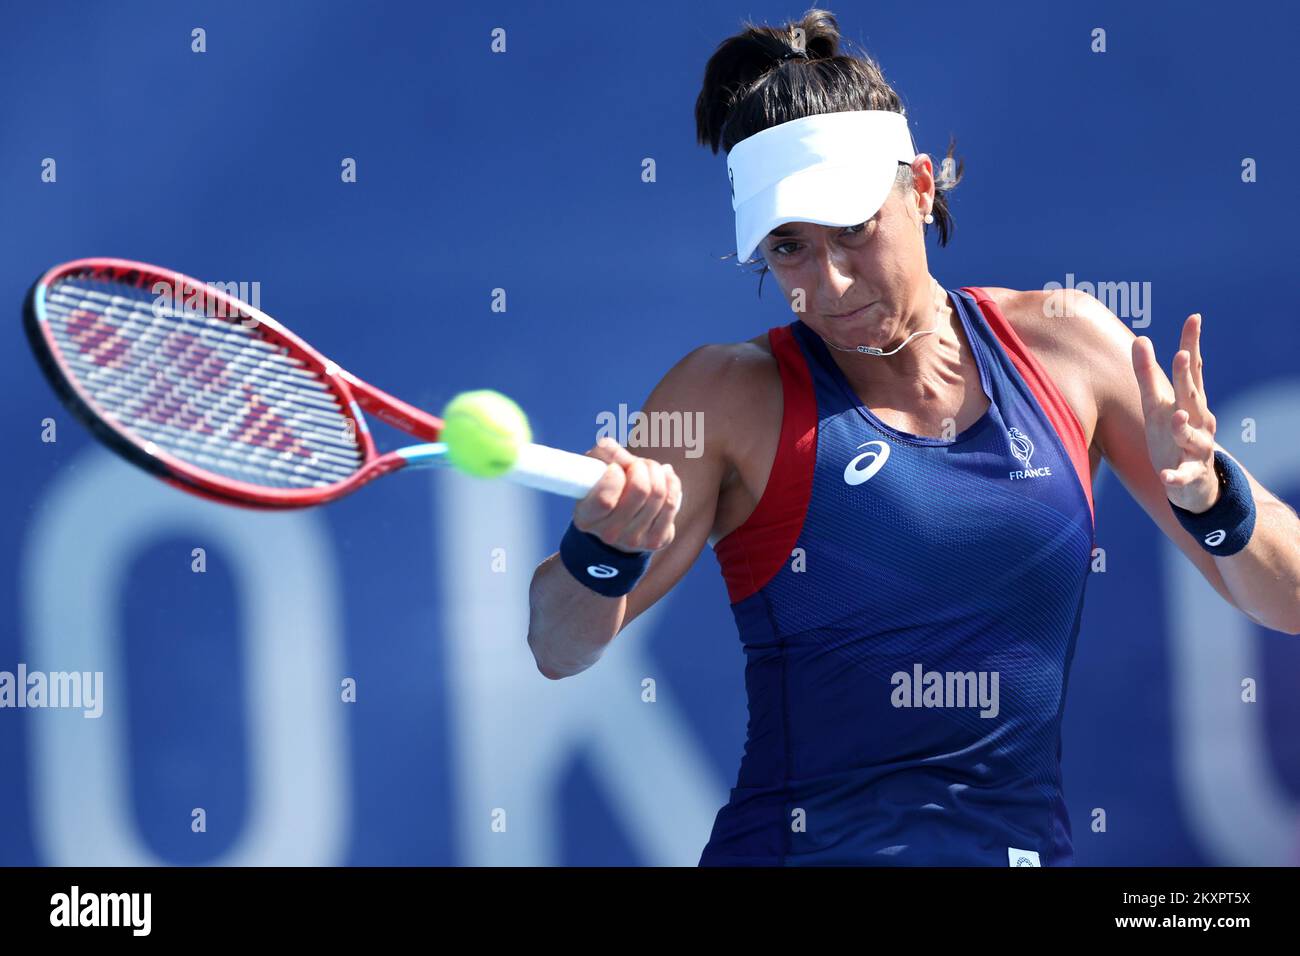 Caroline Garcia of France serves the ball during a tennis competition against Dona Vekic of Croatia at Women's Singles First Round, Tokyo 2020 Olympic Games at Ariake Tennis Park, in Tokyo, Japan, on July 25, 2021. Photo: Igor Kralj/PIXSELL Stock Photo